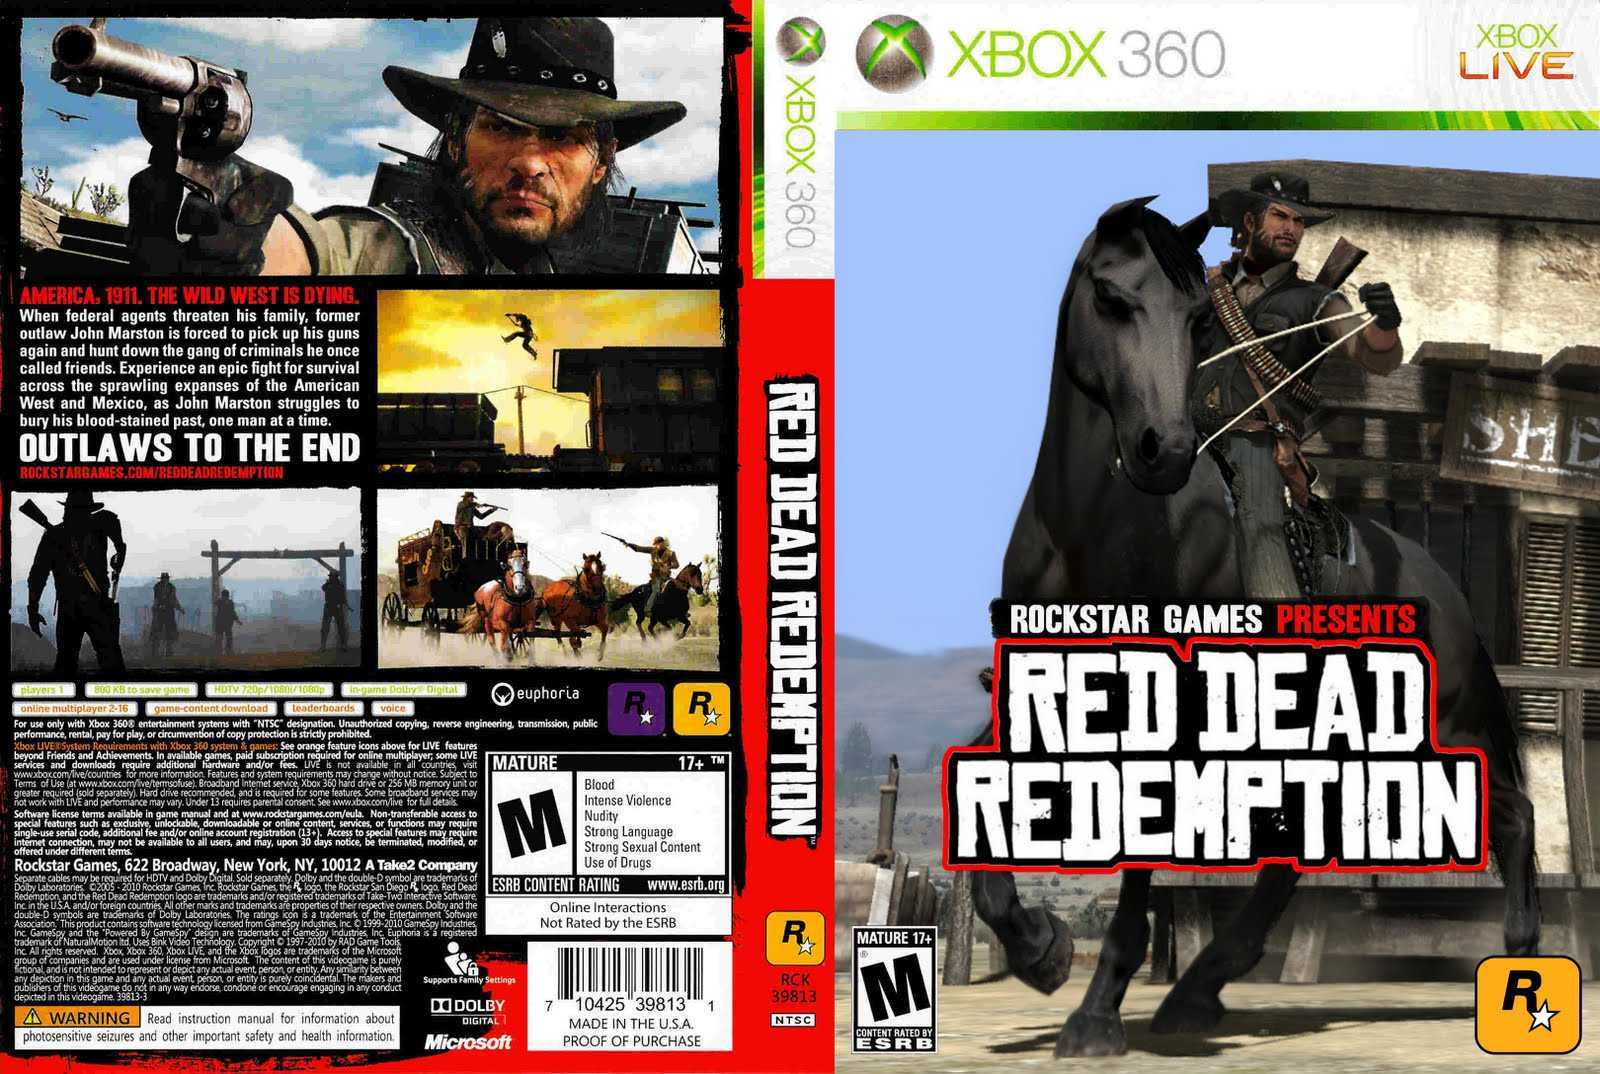 Xbox one игры red dead redemption. Red Dead на Xbox 360. Red Dead Redemption 1 Xbox 360. Red Dead Redemption диск Xbox 360. Red Dead Redemption 2 Xbox диск.